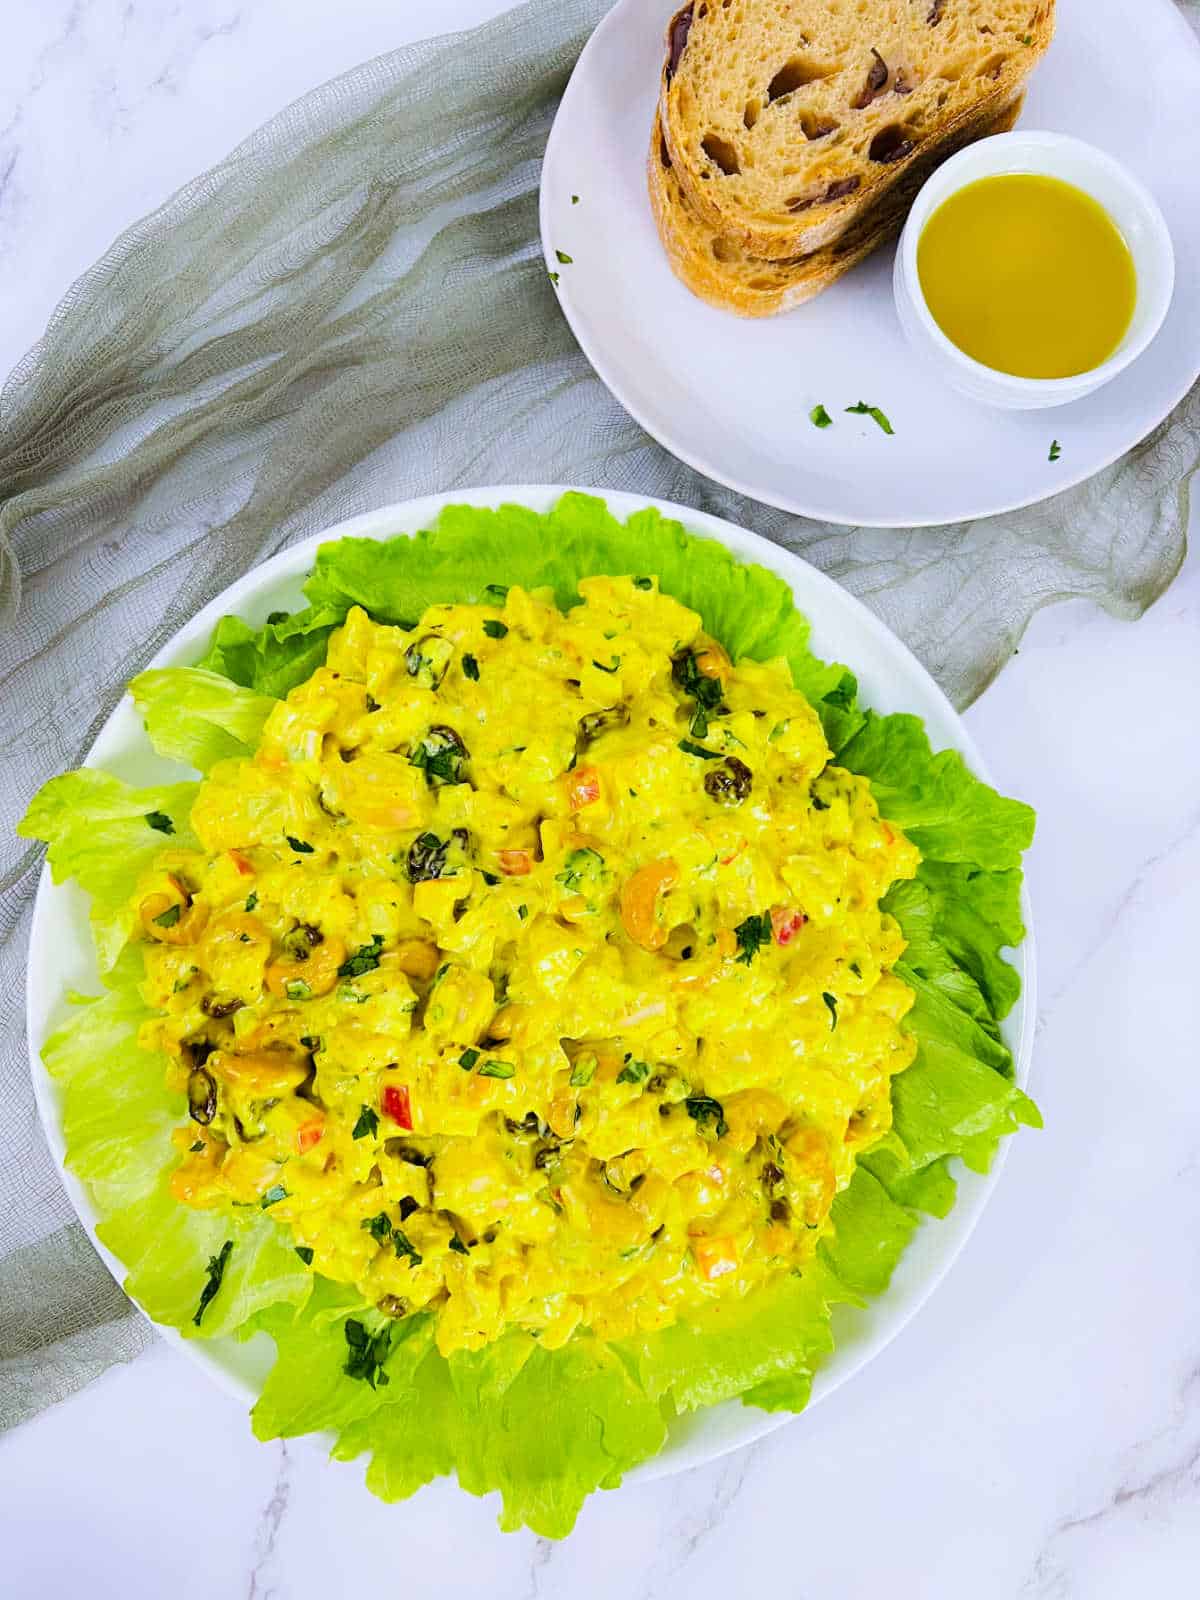 Curried chicken salad served on a bed of greens.